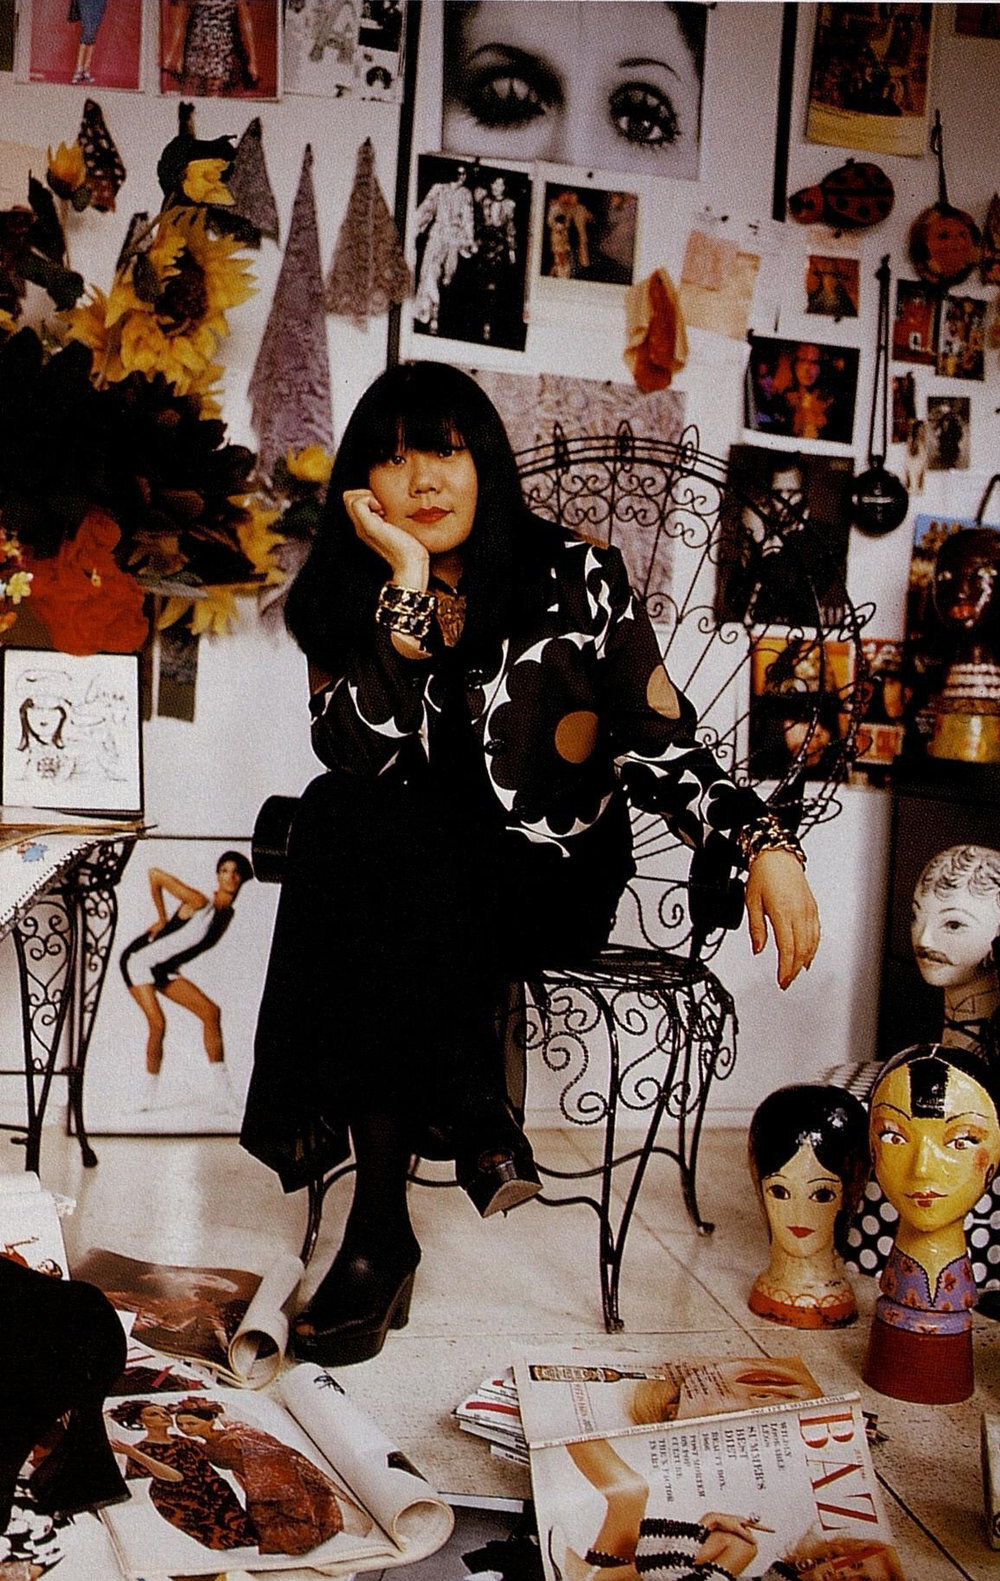 Anna Sui in her office. Photographed by Jesse Frohman for Harper's Bazaar, September 1992.